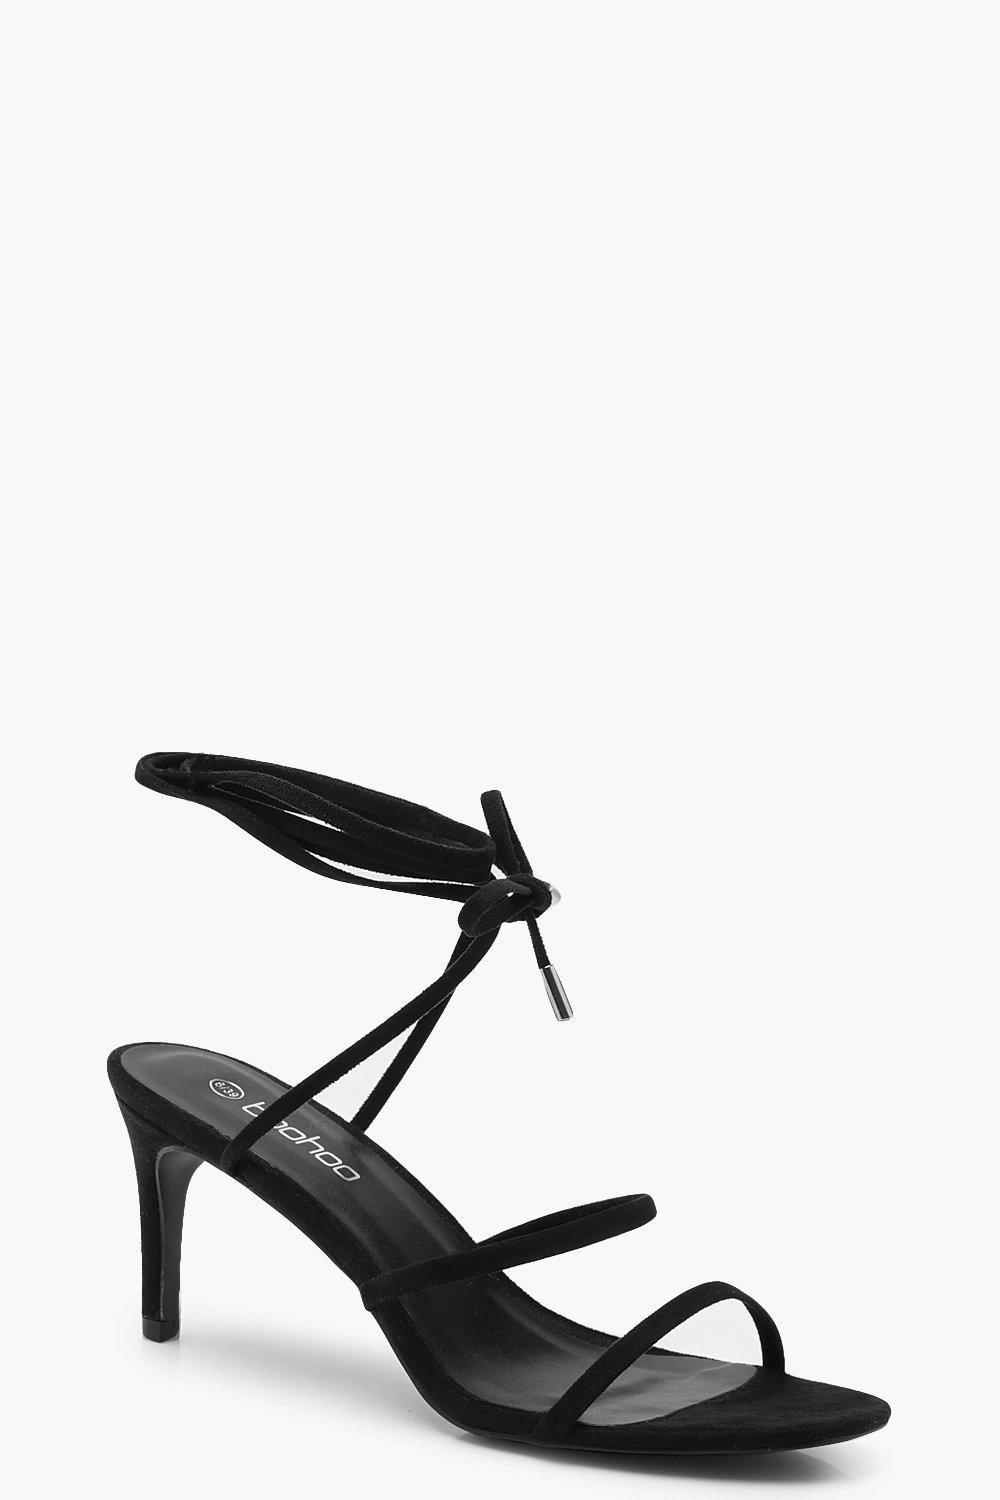 black barely there mid heel sandals